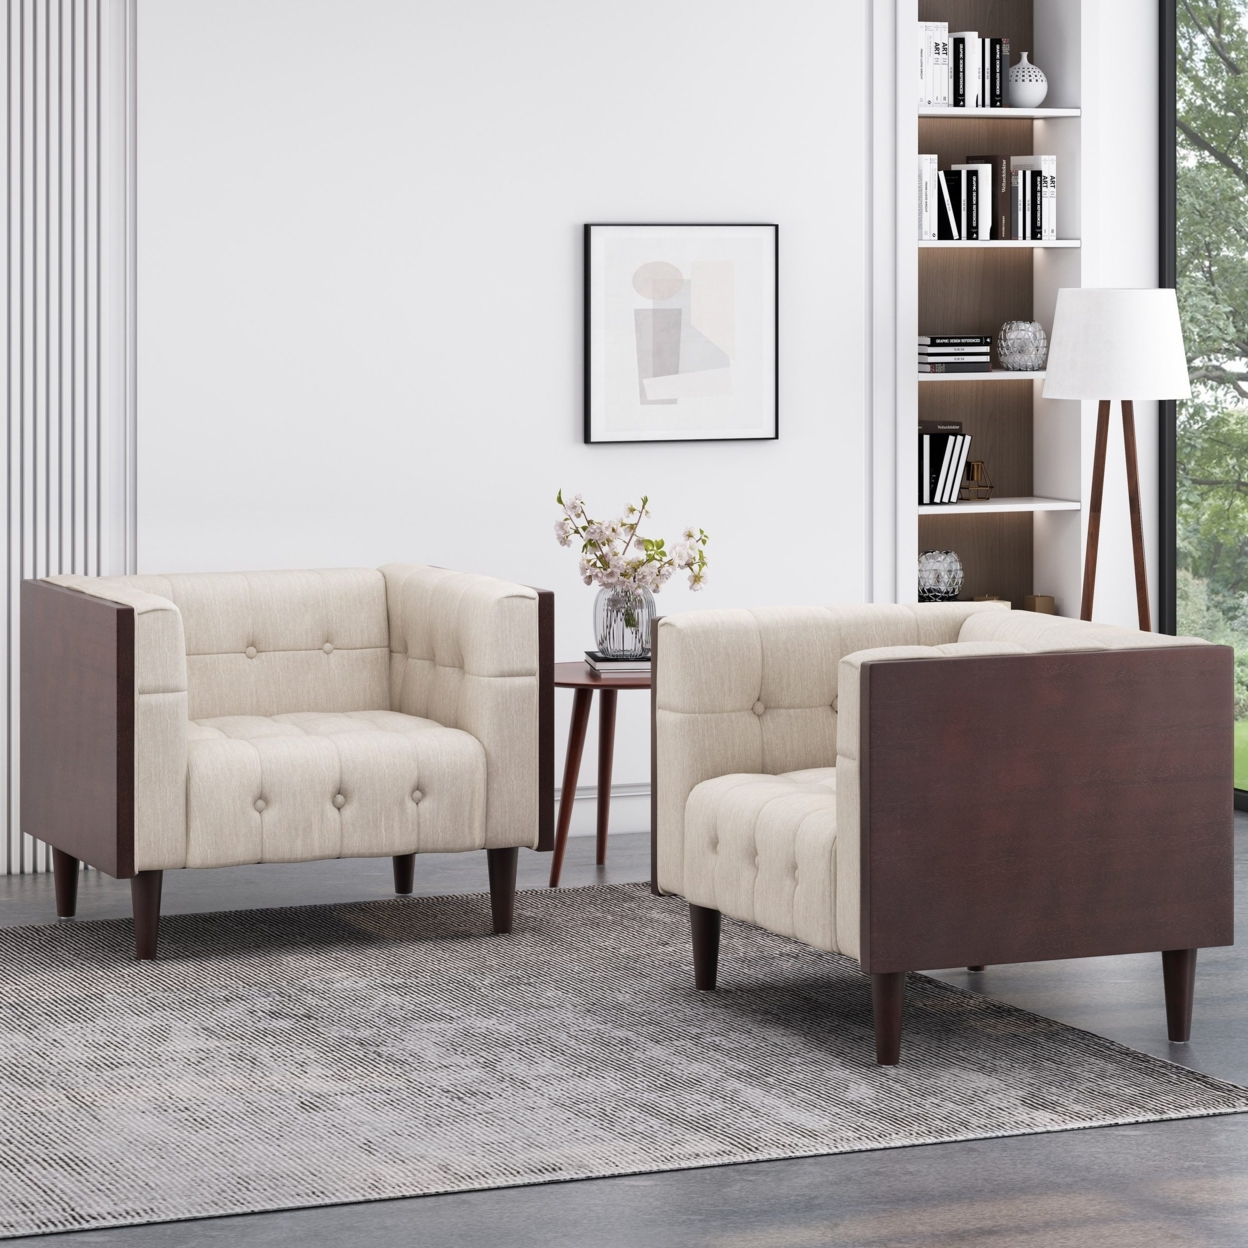 Croton Contemporary Tufted Club Chairs, Set Of 2 - Beige